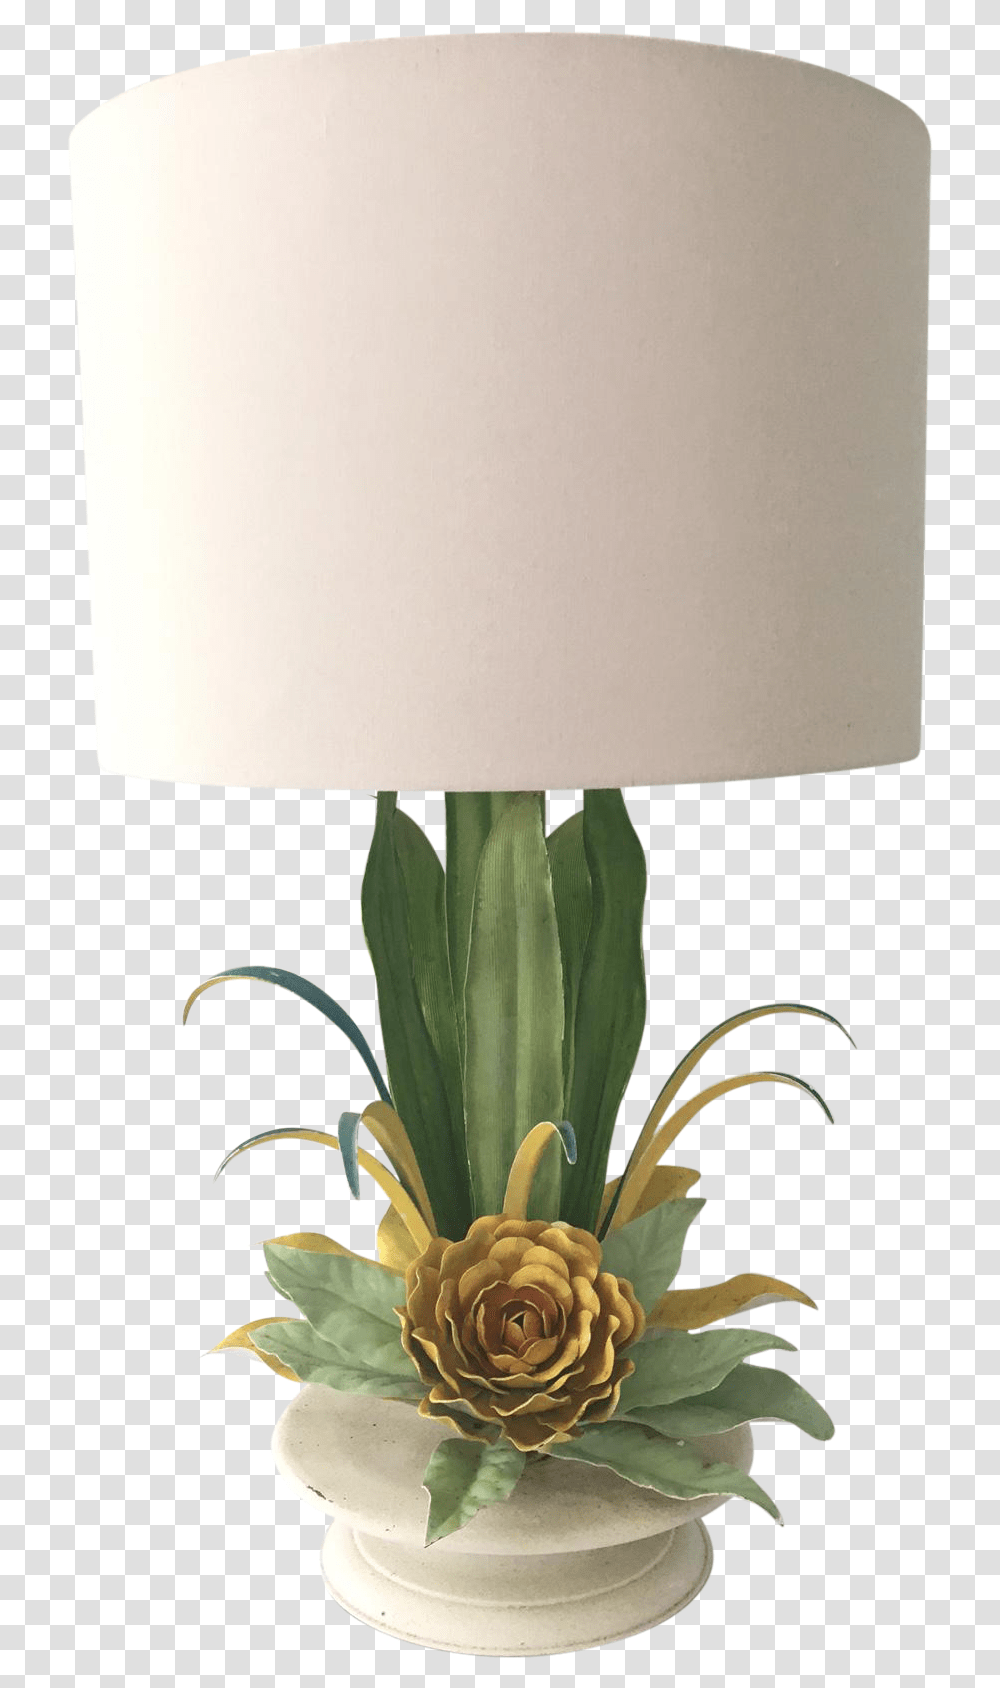 Lilly Lilypad Drawing Lily Pad Flower Lamp, Table Lamp, Plant, Blossom, Vase Transparent Png